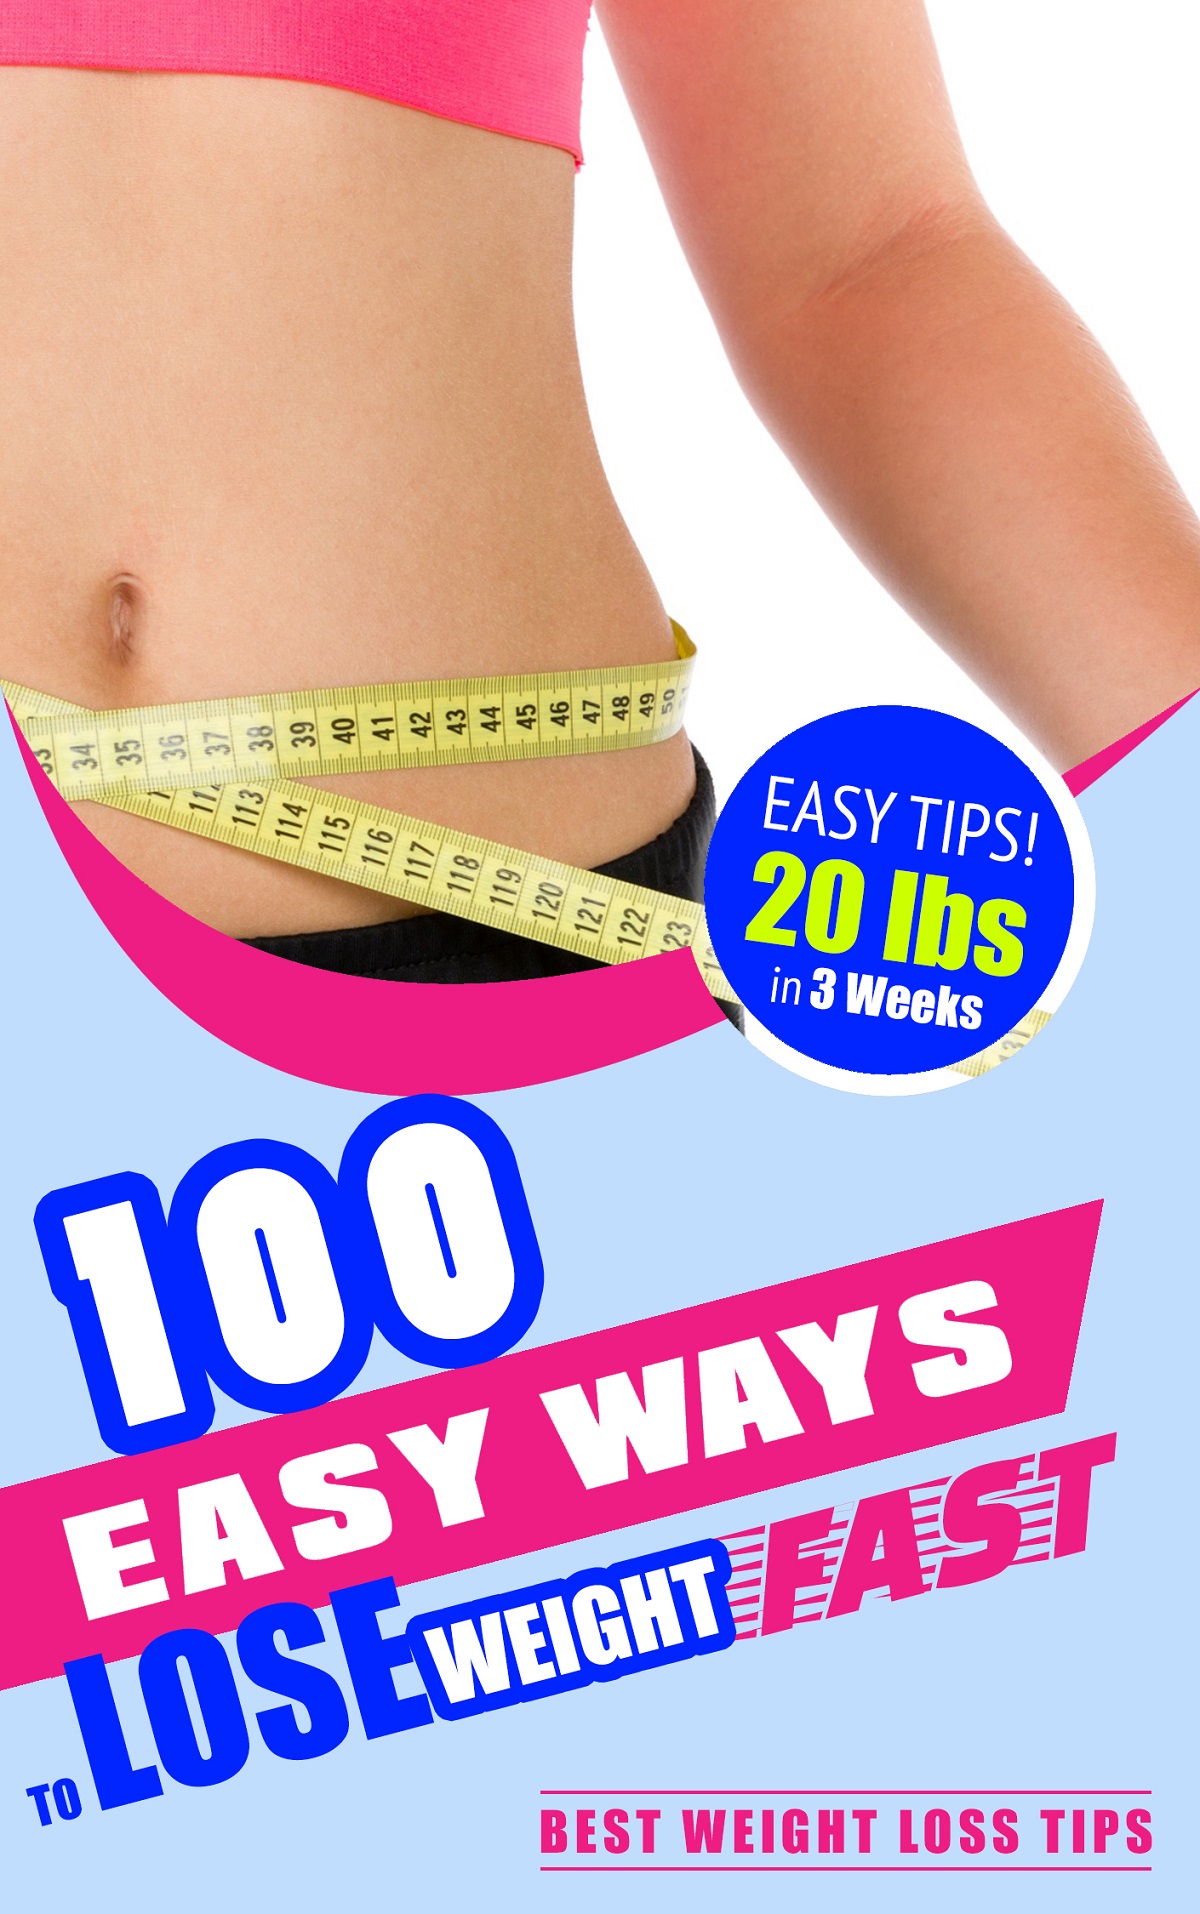 best way to lose weight quickly